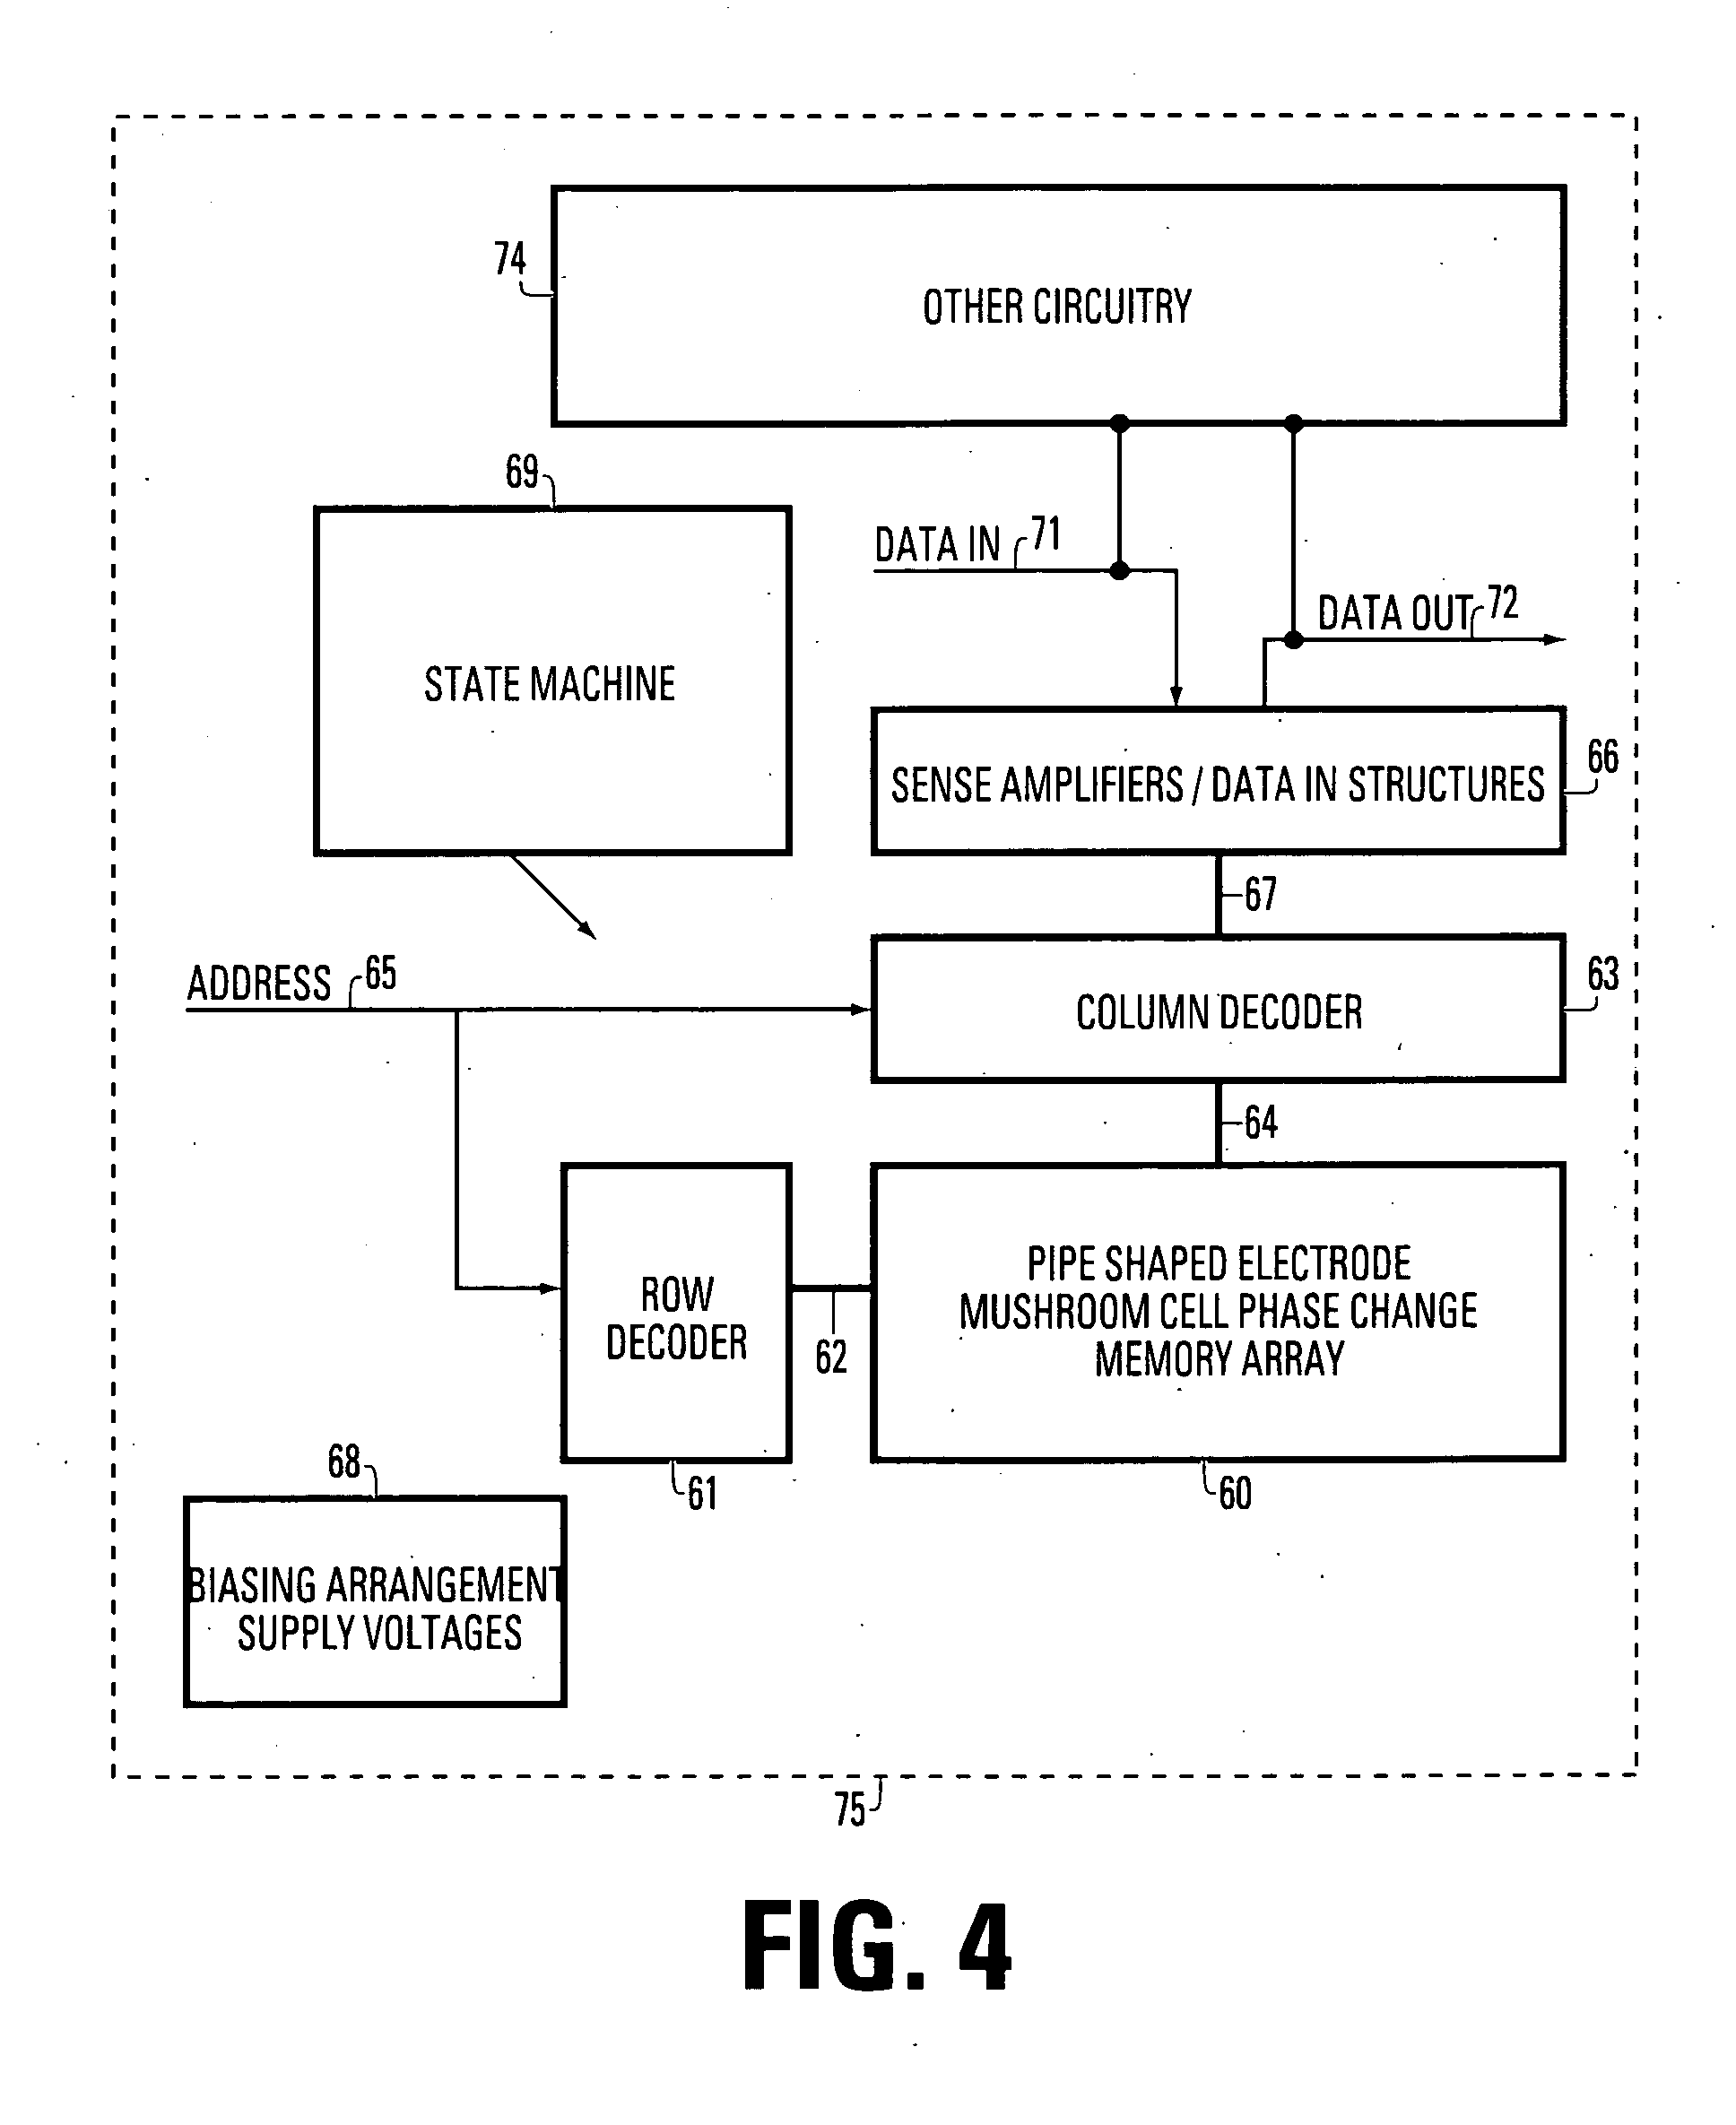 Manufacturing method for pipe-shaped electrode phase change memory